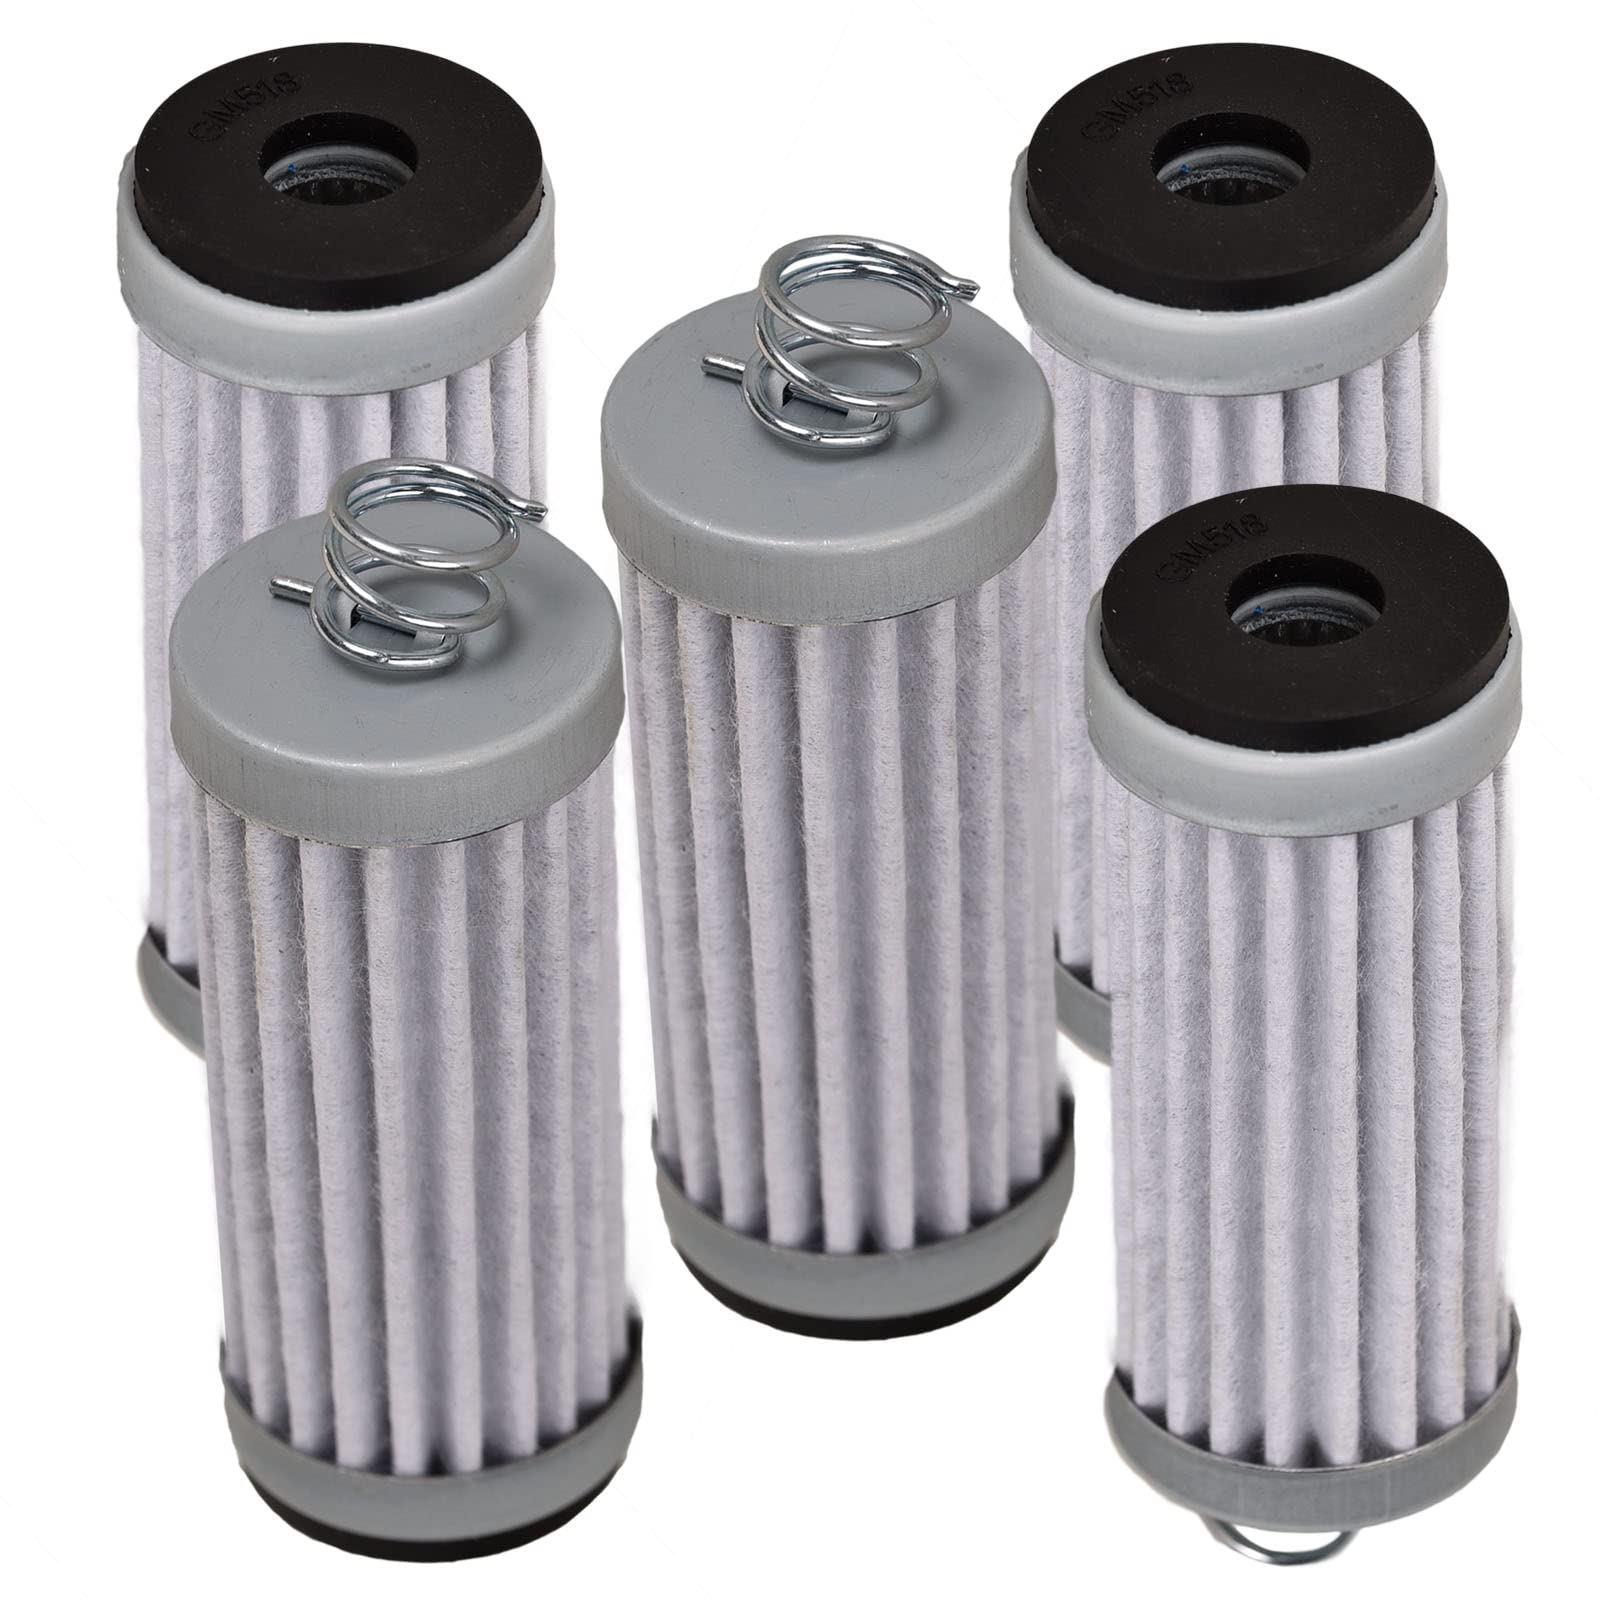 HIFROM (Pack of 5) Replacement Oil Filter 1A632026450 AM131102 535402819 586666801 Compatible with K66I K66L K66M K66R K574B K574C K574D K574F K664GA K664J K664K von hifrom